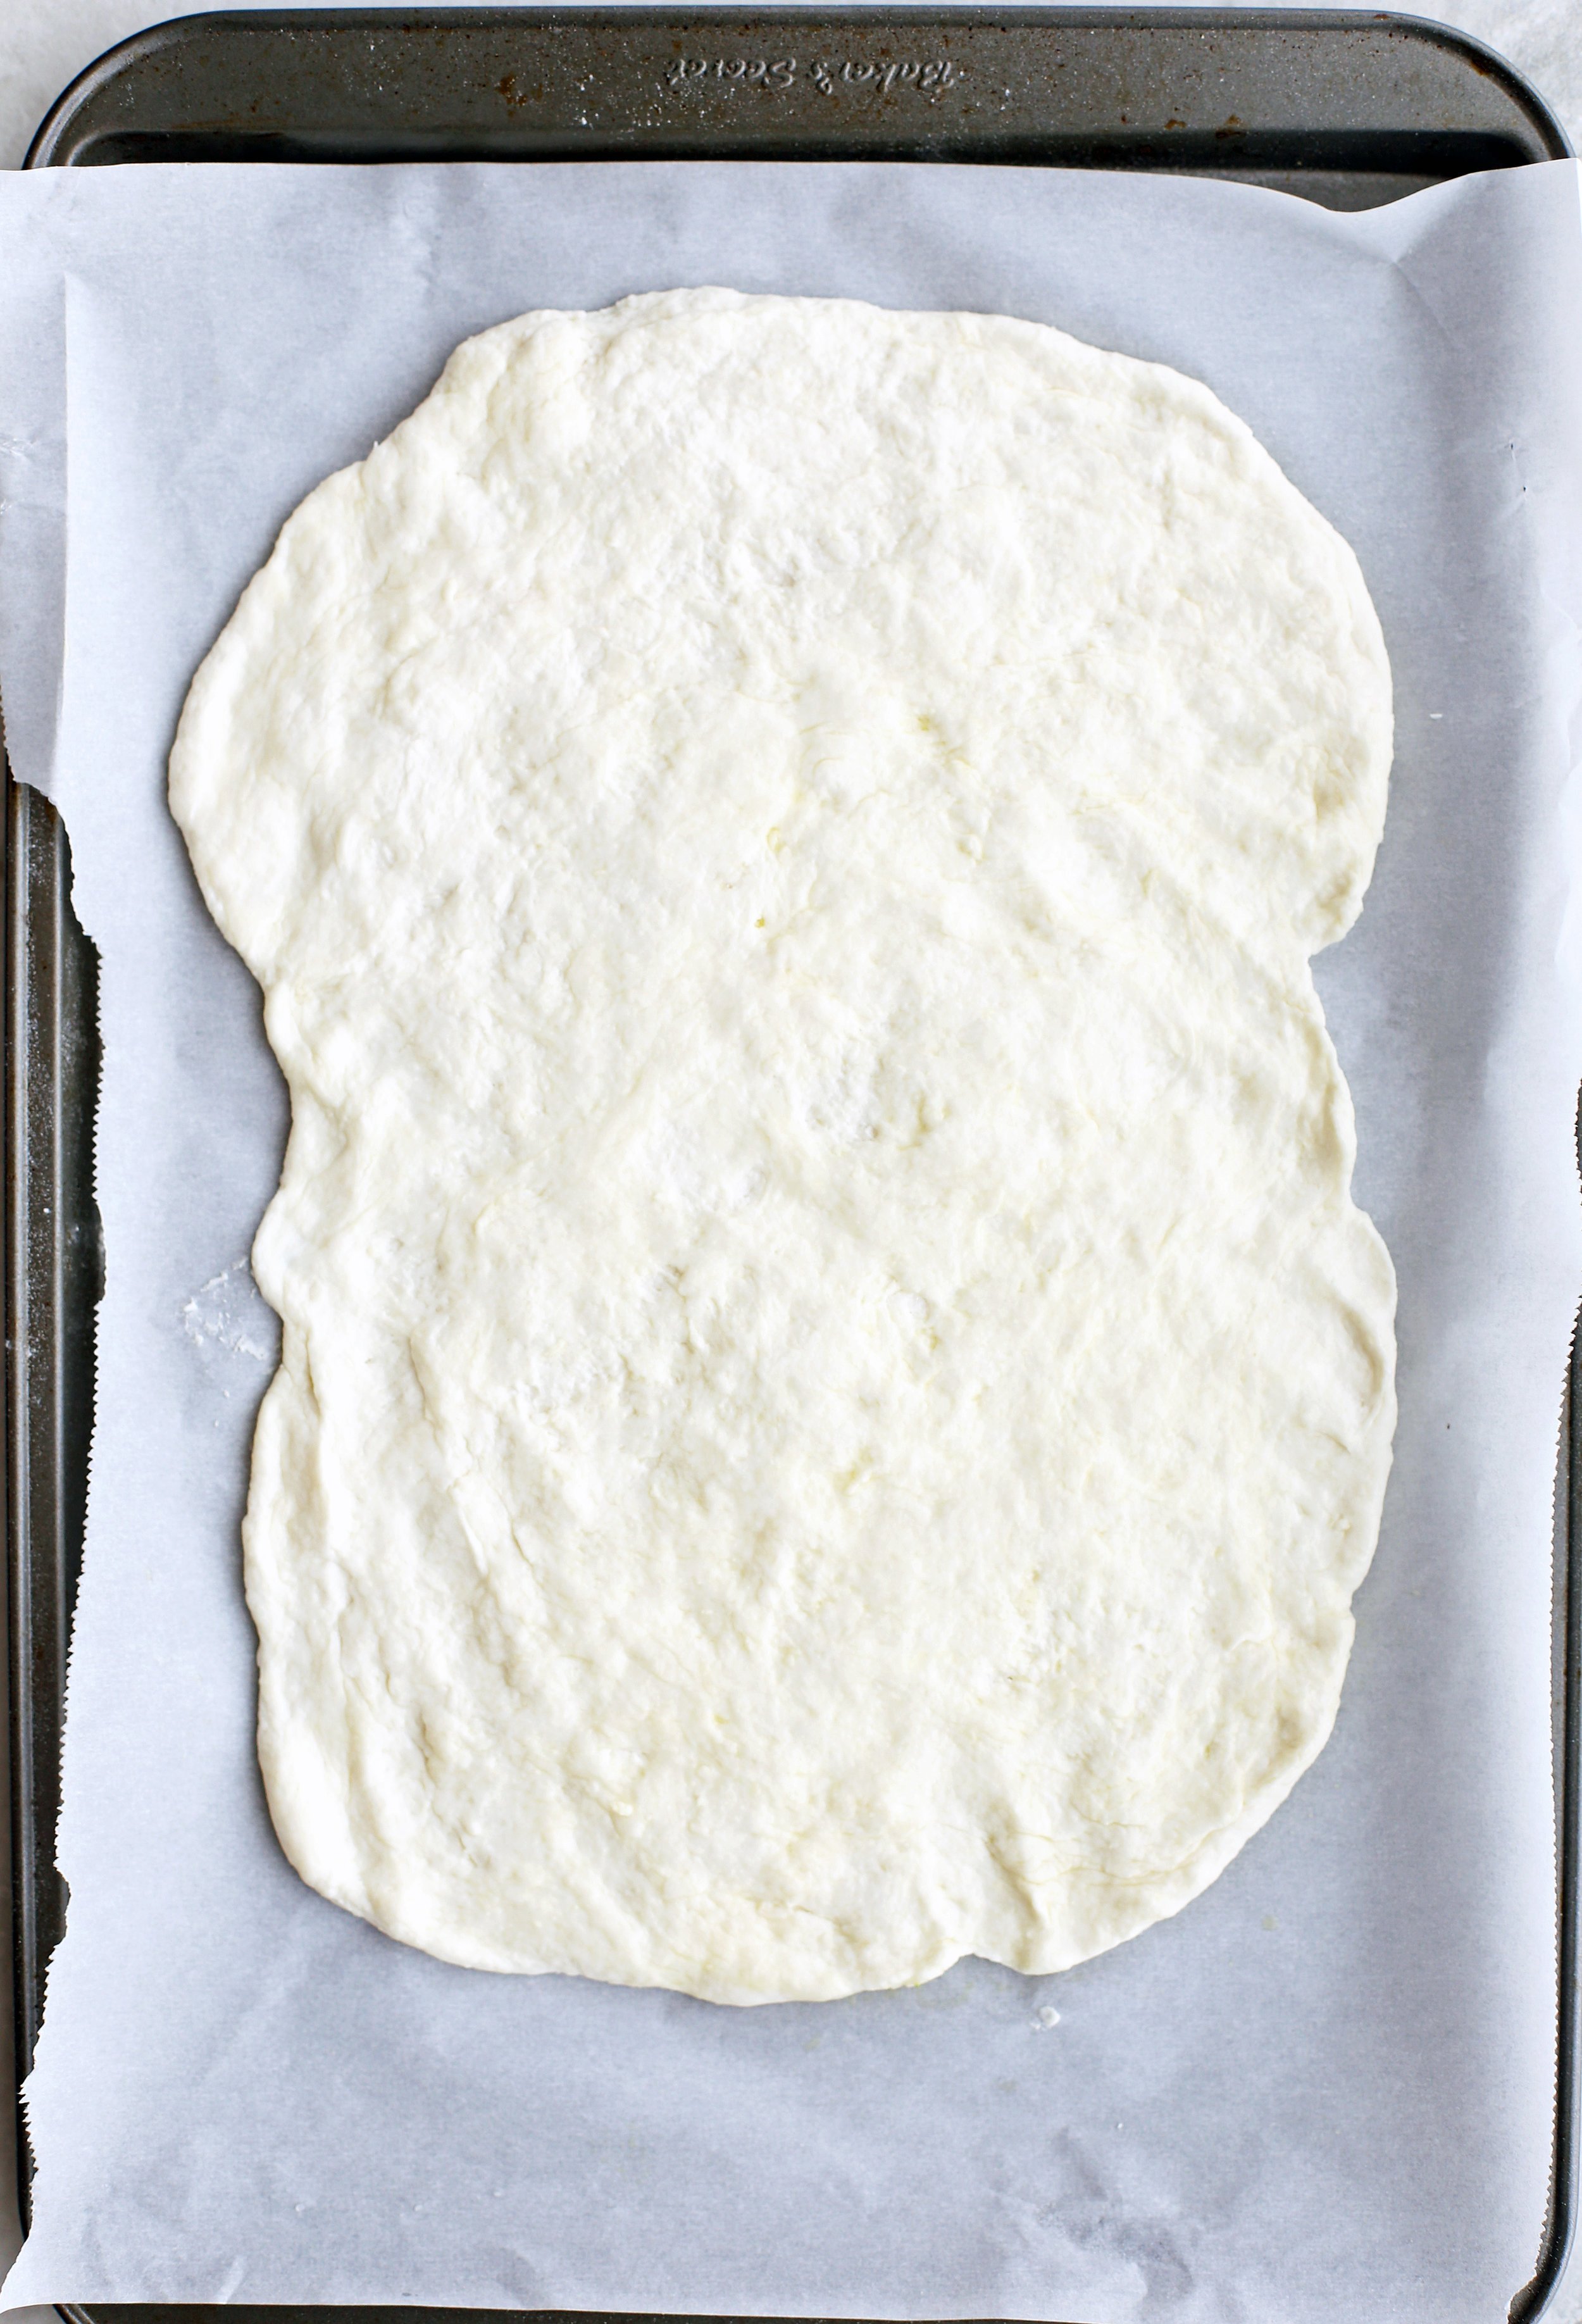 Flatbread dough flattered into a rectangle shape on a parchment-lined baking sheet.